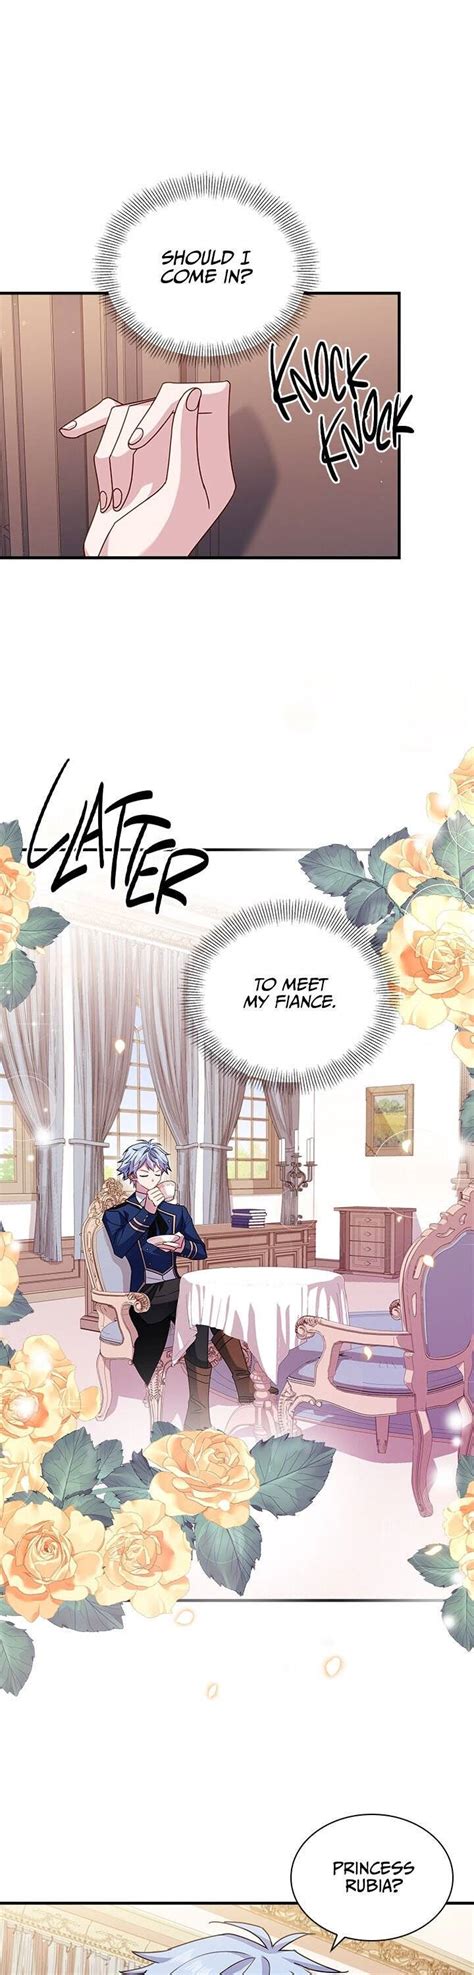 Read The Lady Wants to Rest Manga English [New Chapters] Online Free